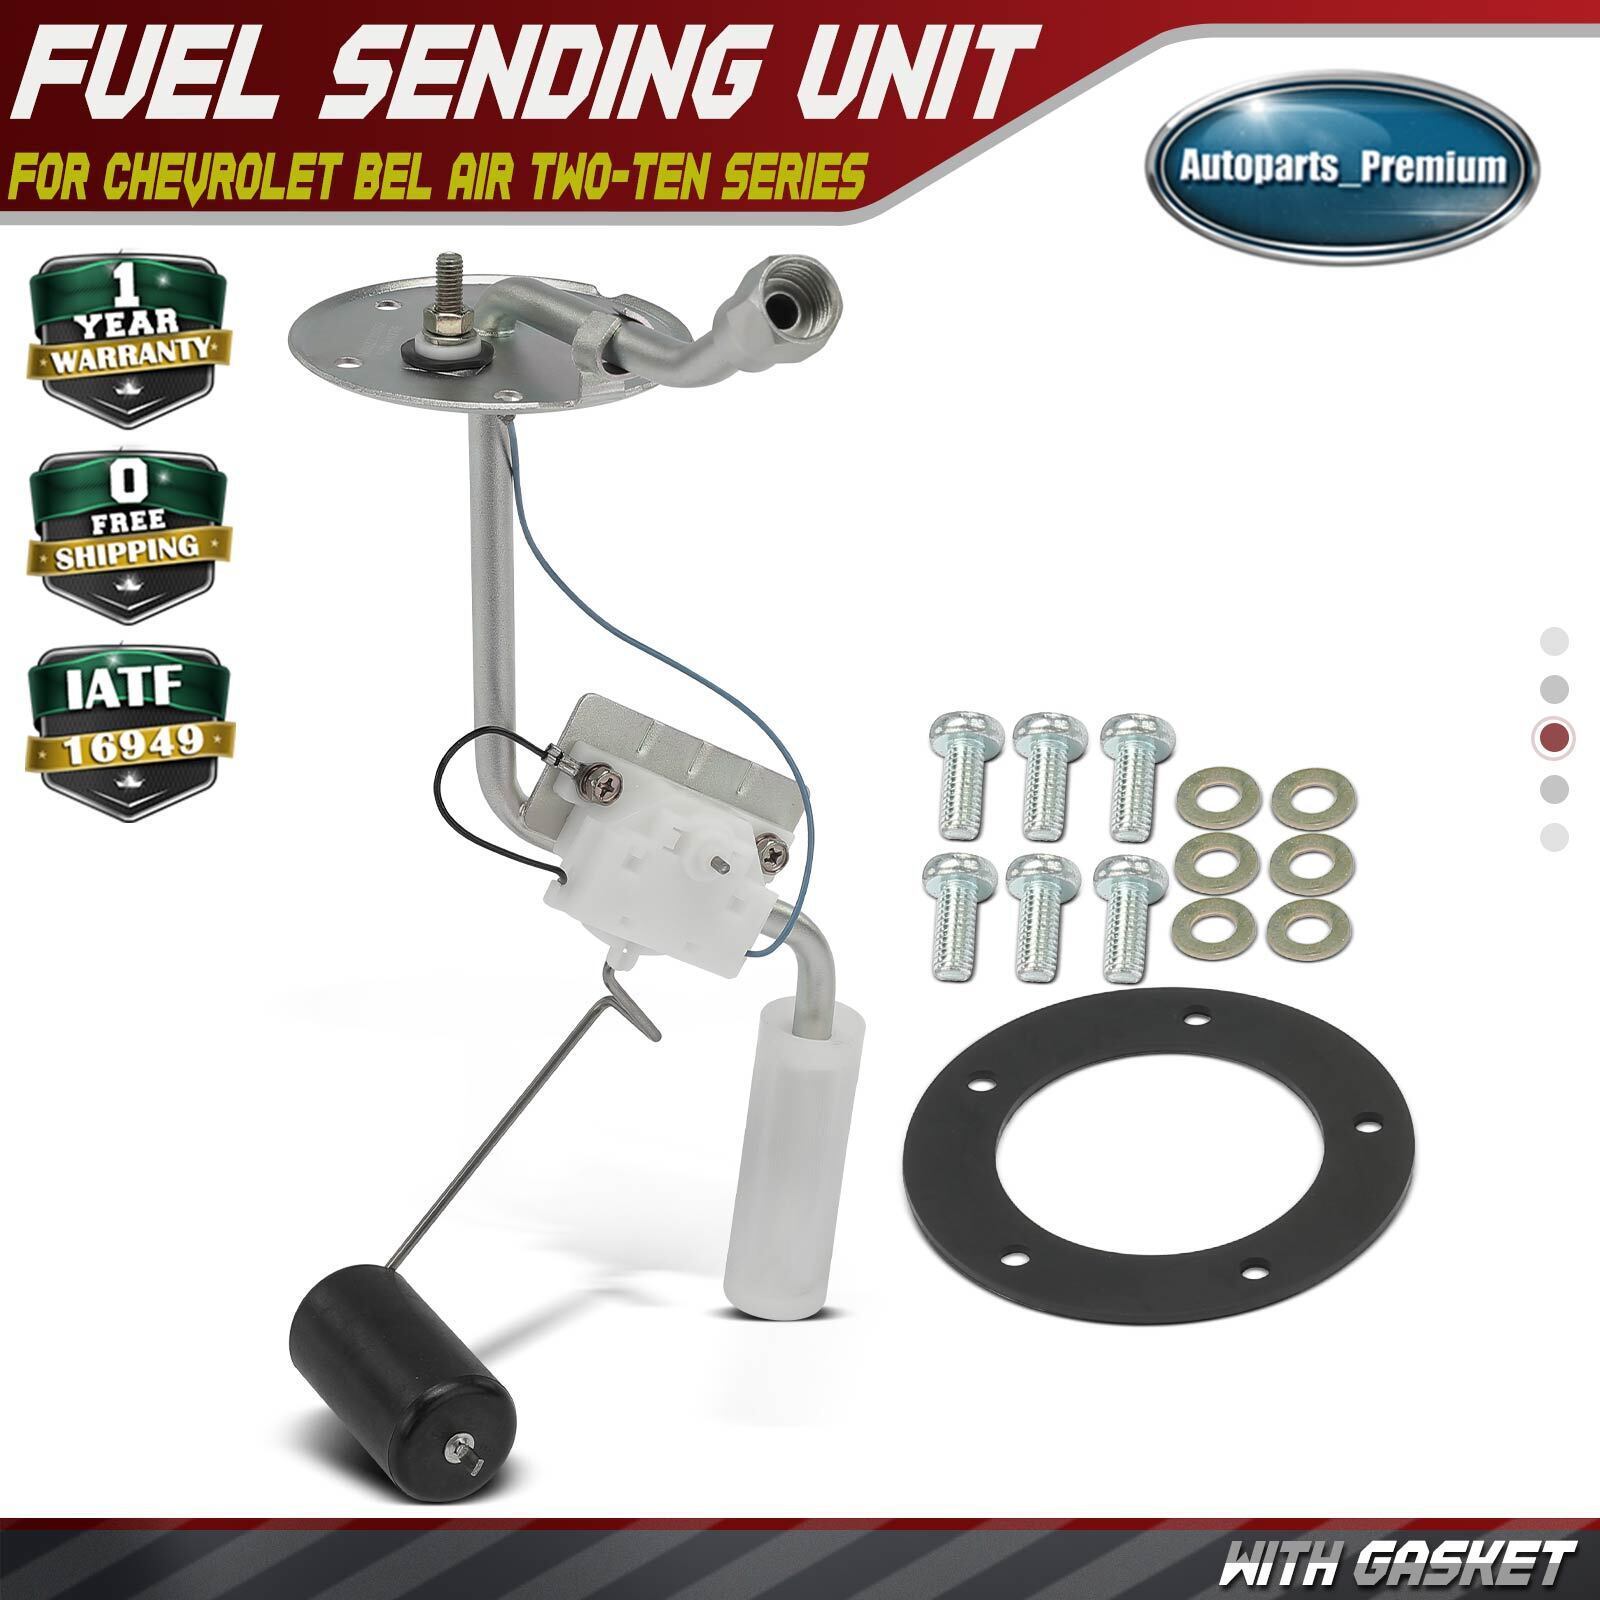 Fuel Sending Unit for Chevrolet Bel Air One-Fifty / Two-Ten Series 1955-1957 GAS